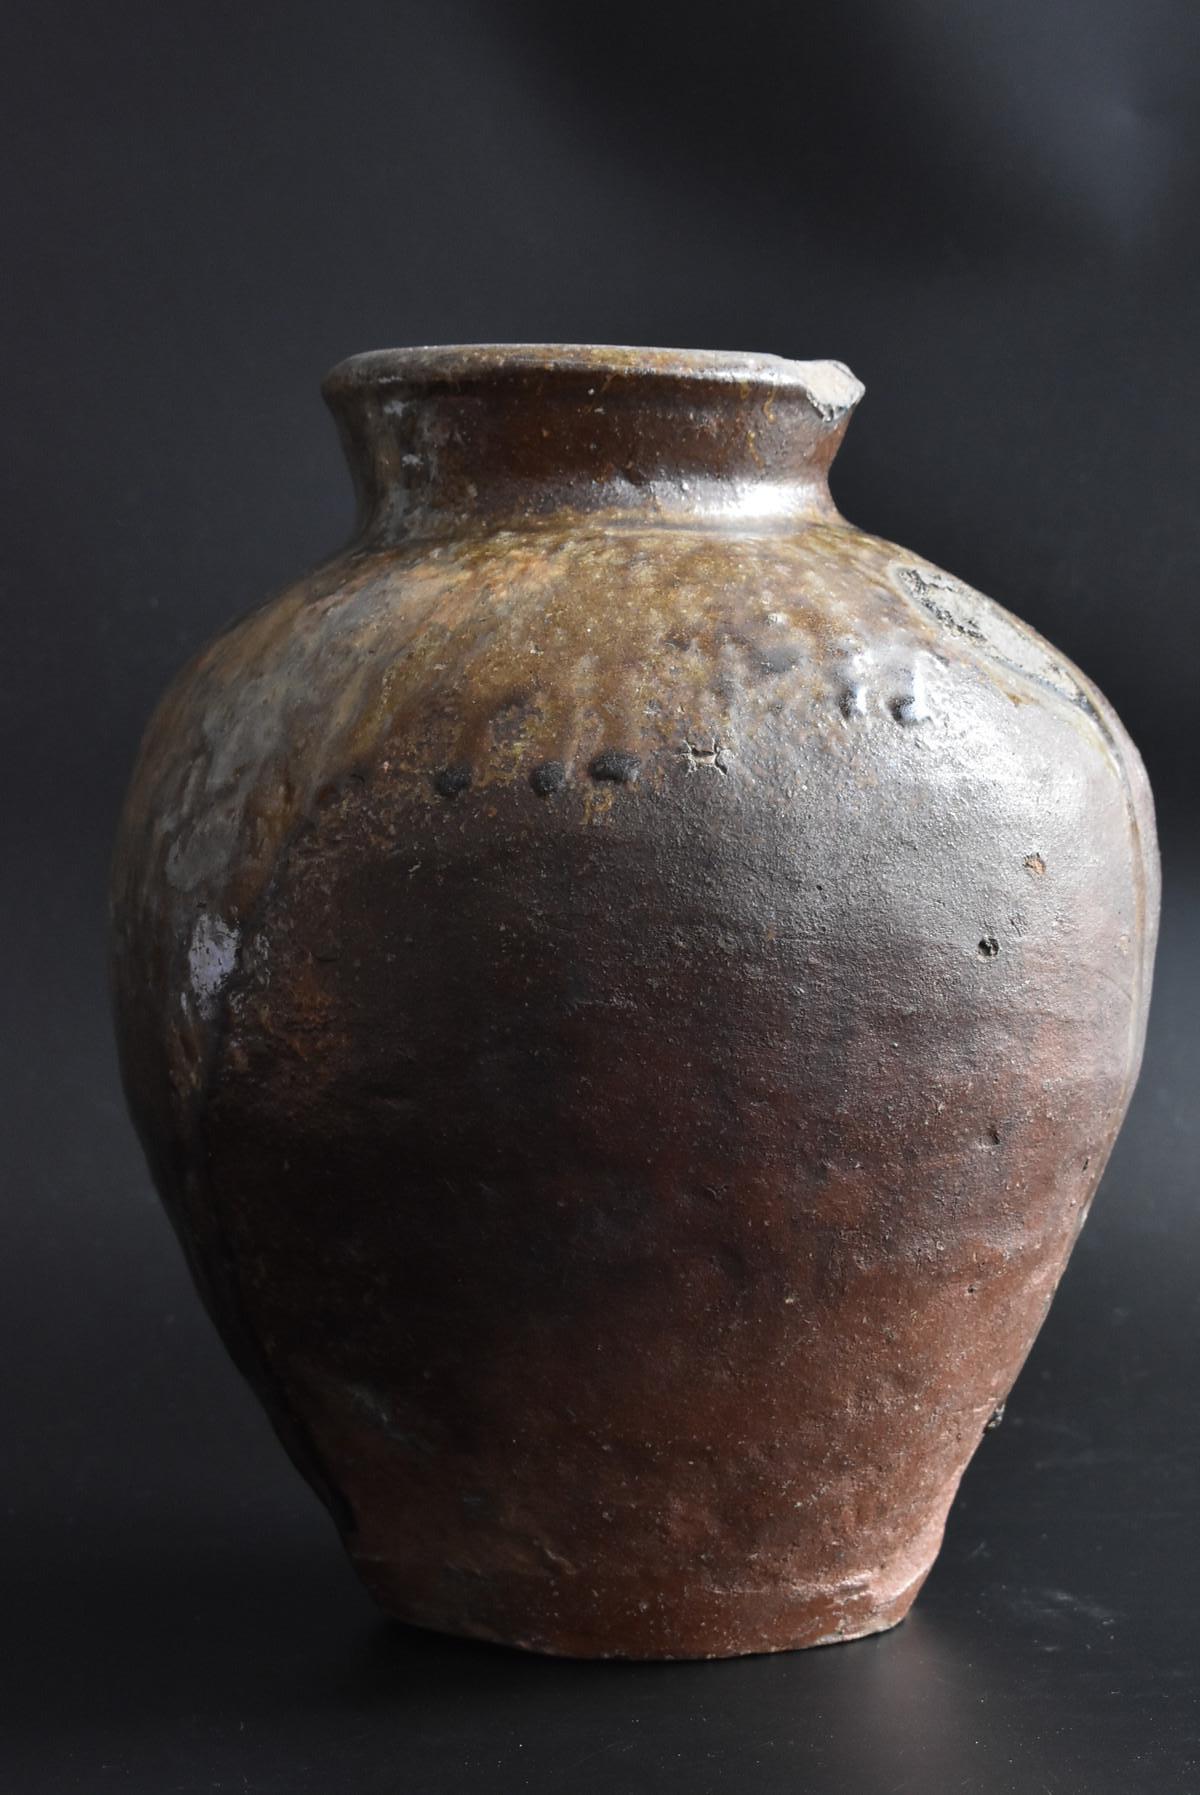 Hand-Crafted Japanese Tokoname Pot 14th-16th Century Muromachi Period / Tsubo / Old Pottery